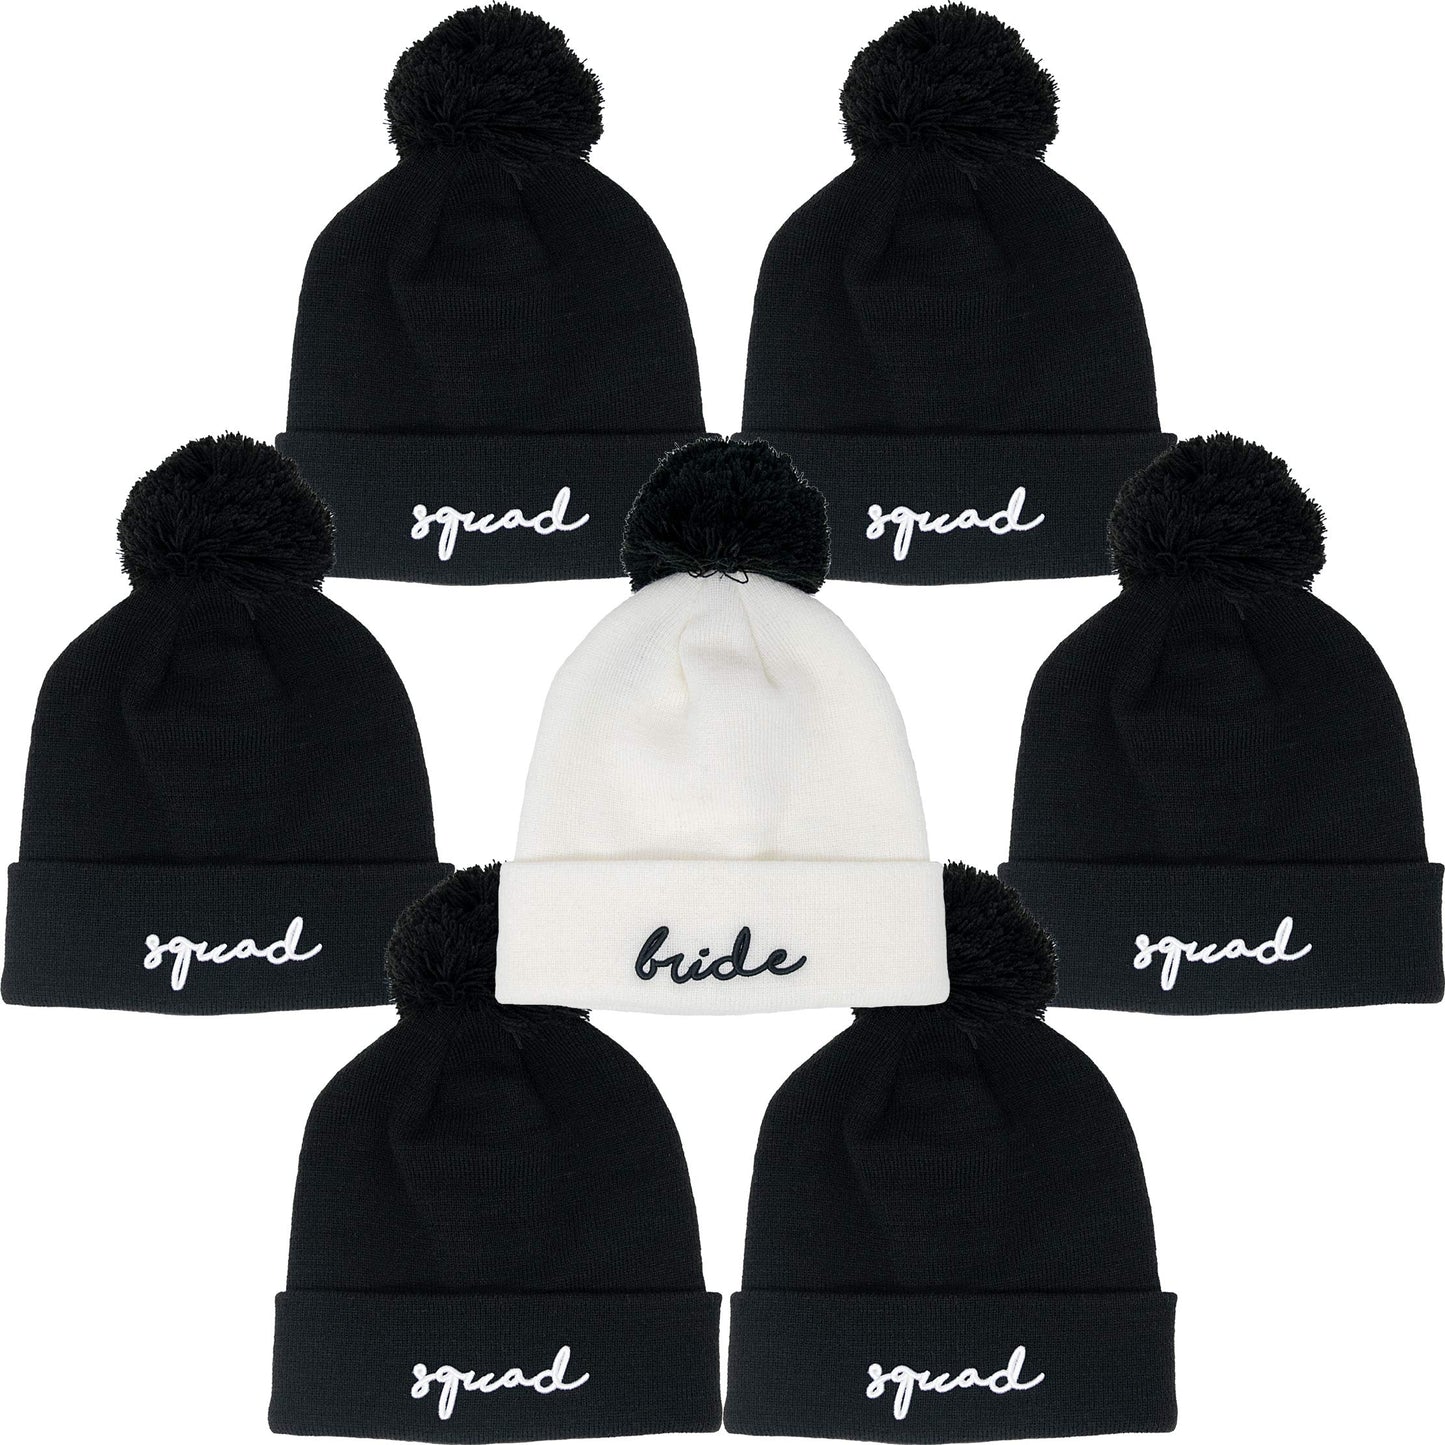 Bride/Squad Embroidered Pom Beanie by Funky Junque